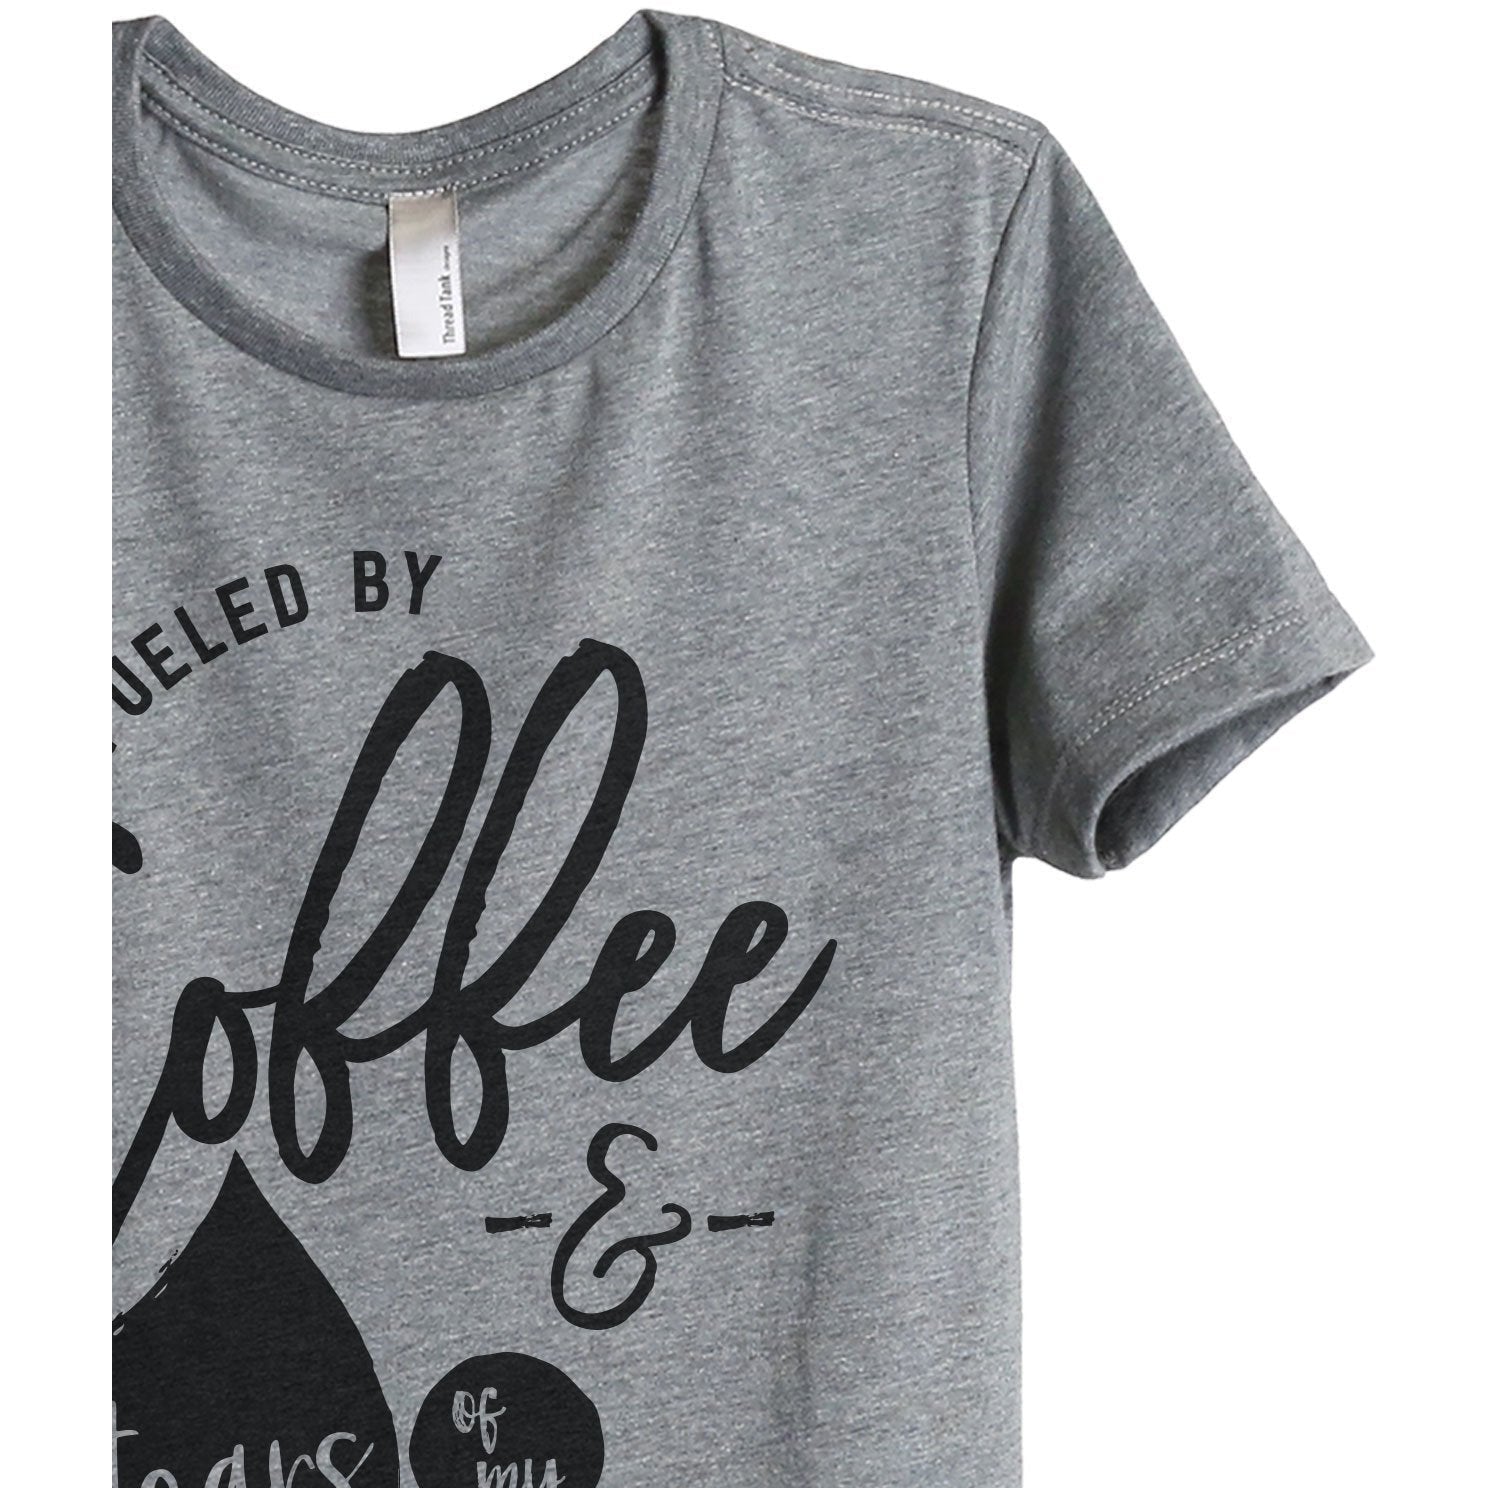 Fueled By Coffee And Tears Of My Enemies Women's Relaxed Crewneck T-Shirt Top Tee Heather Grey